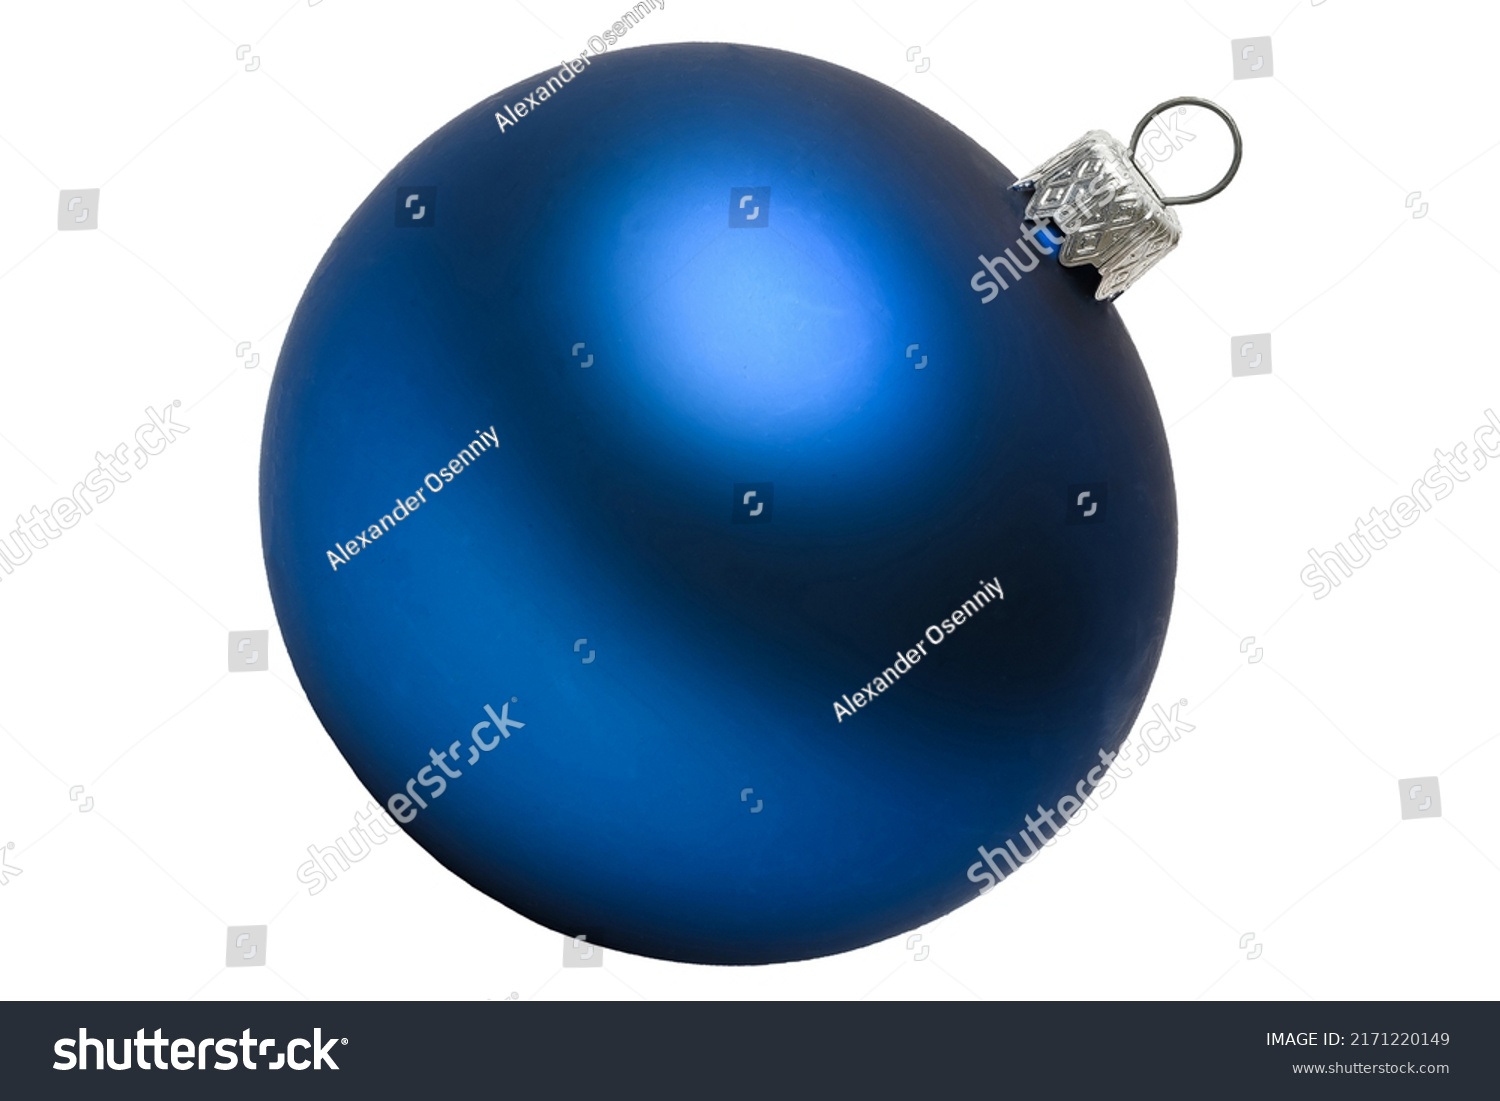 It is a dark blue Christmas ball on white background. New Year's Eve. This is close-up view of an isolated blue ball. #2171220149